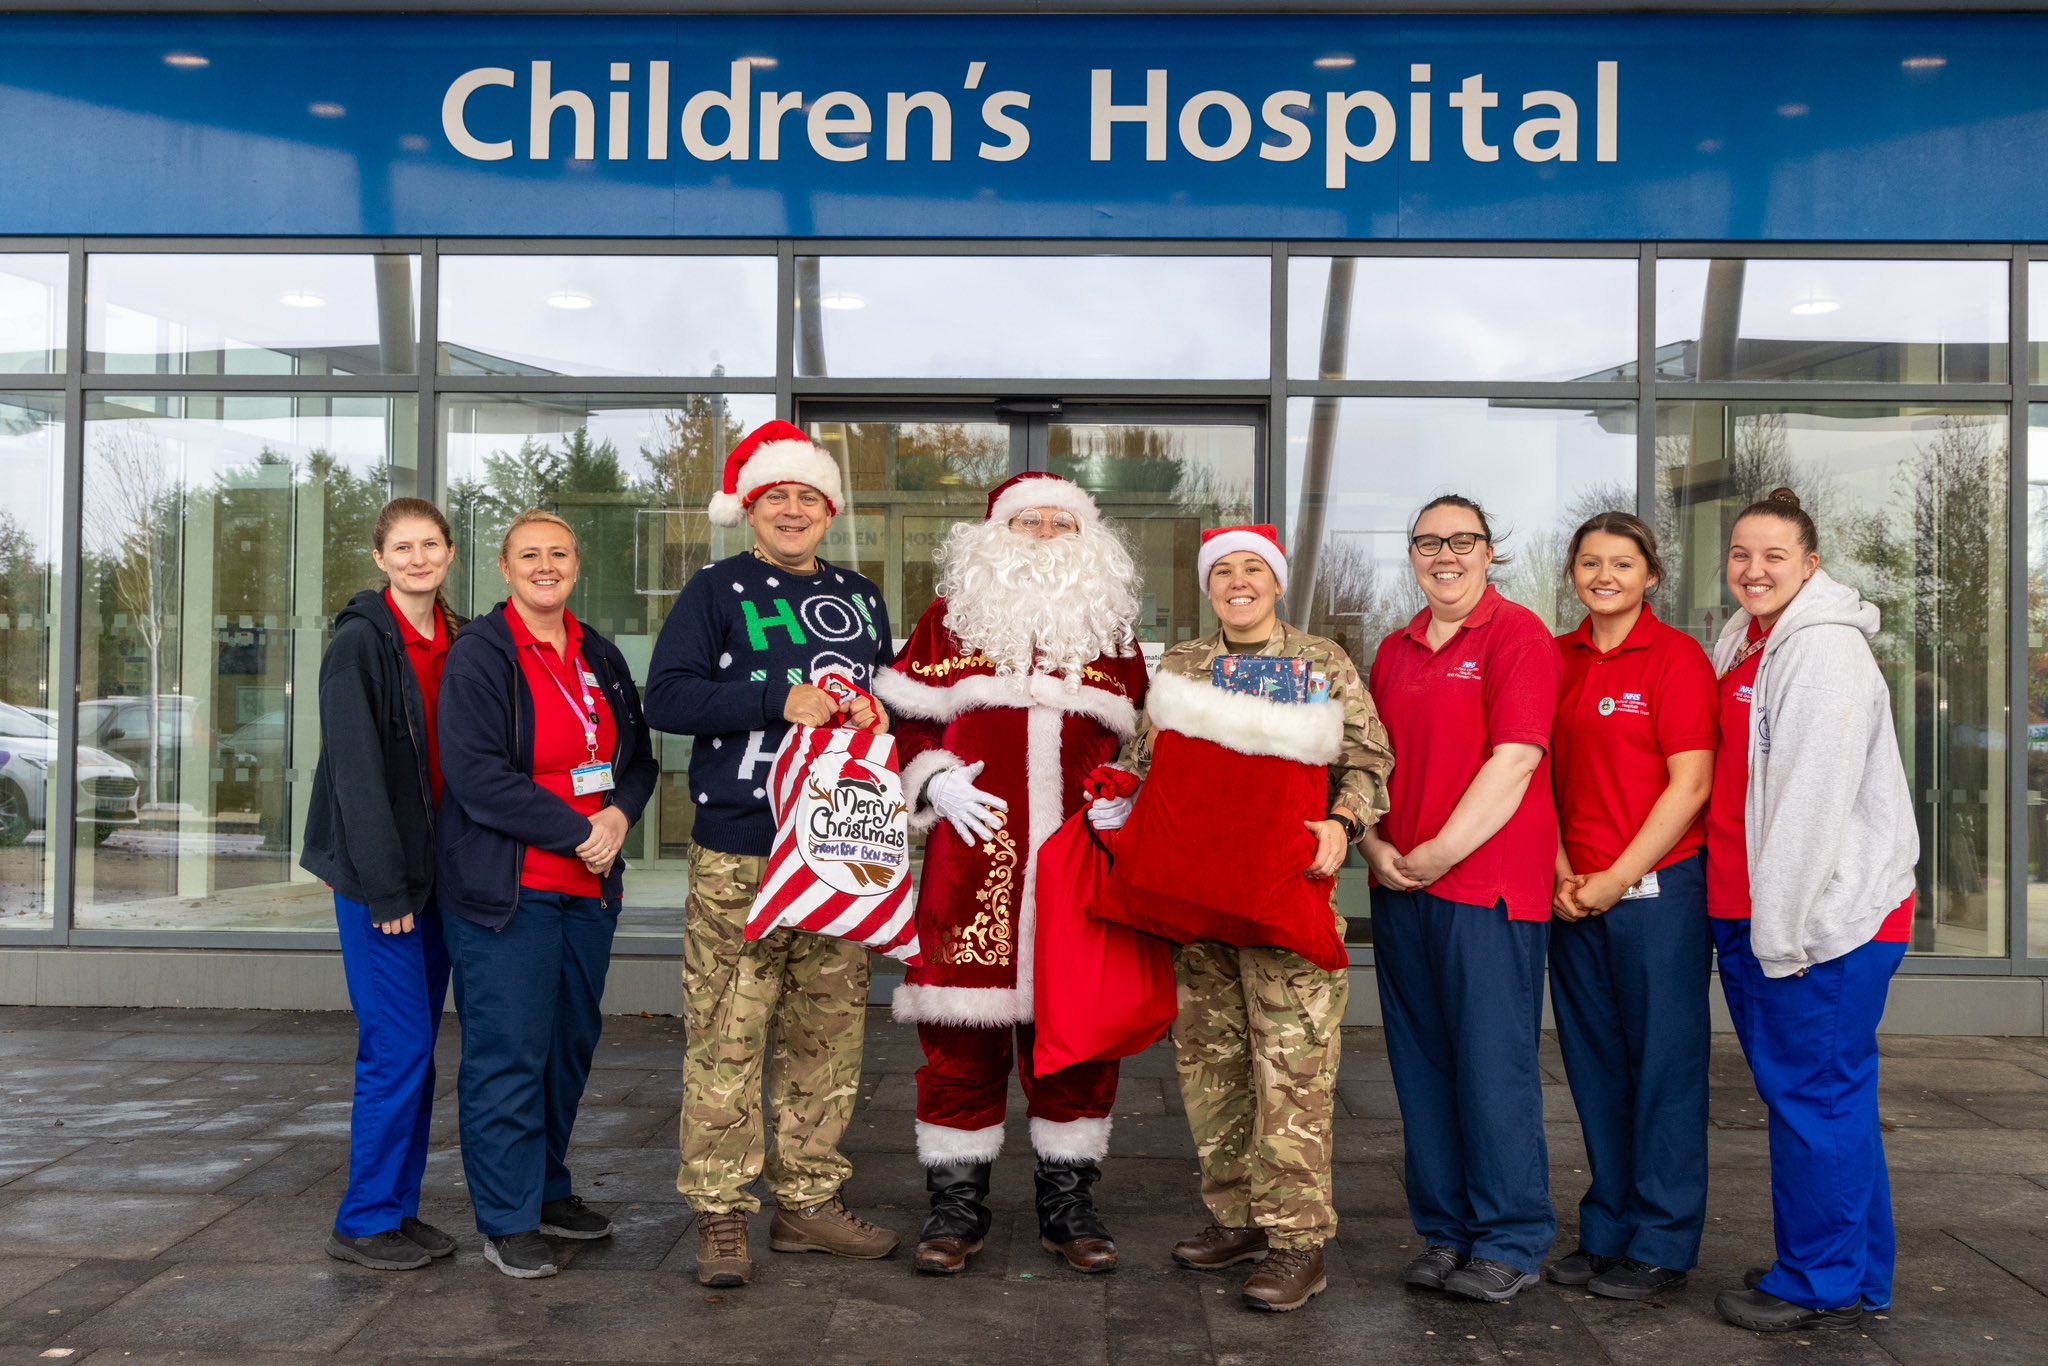 Santa standing with two servicepeople and NHS personnel holding gifts outside of the hospital.